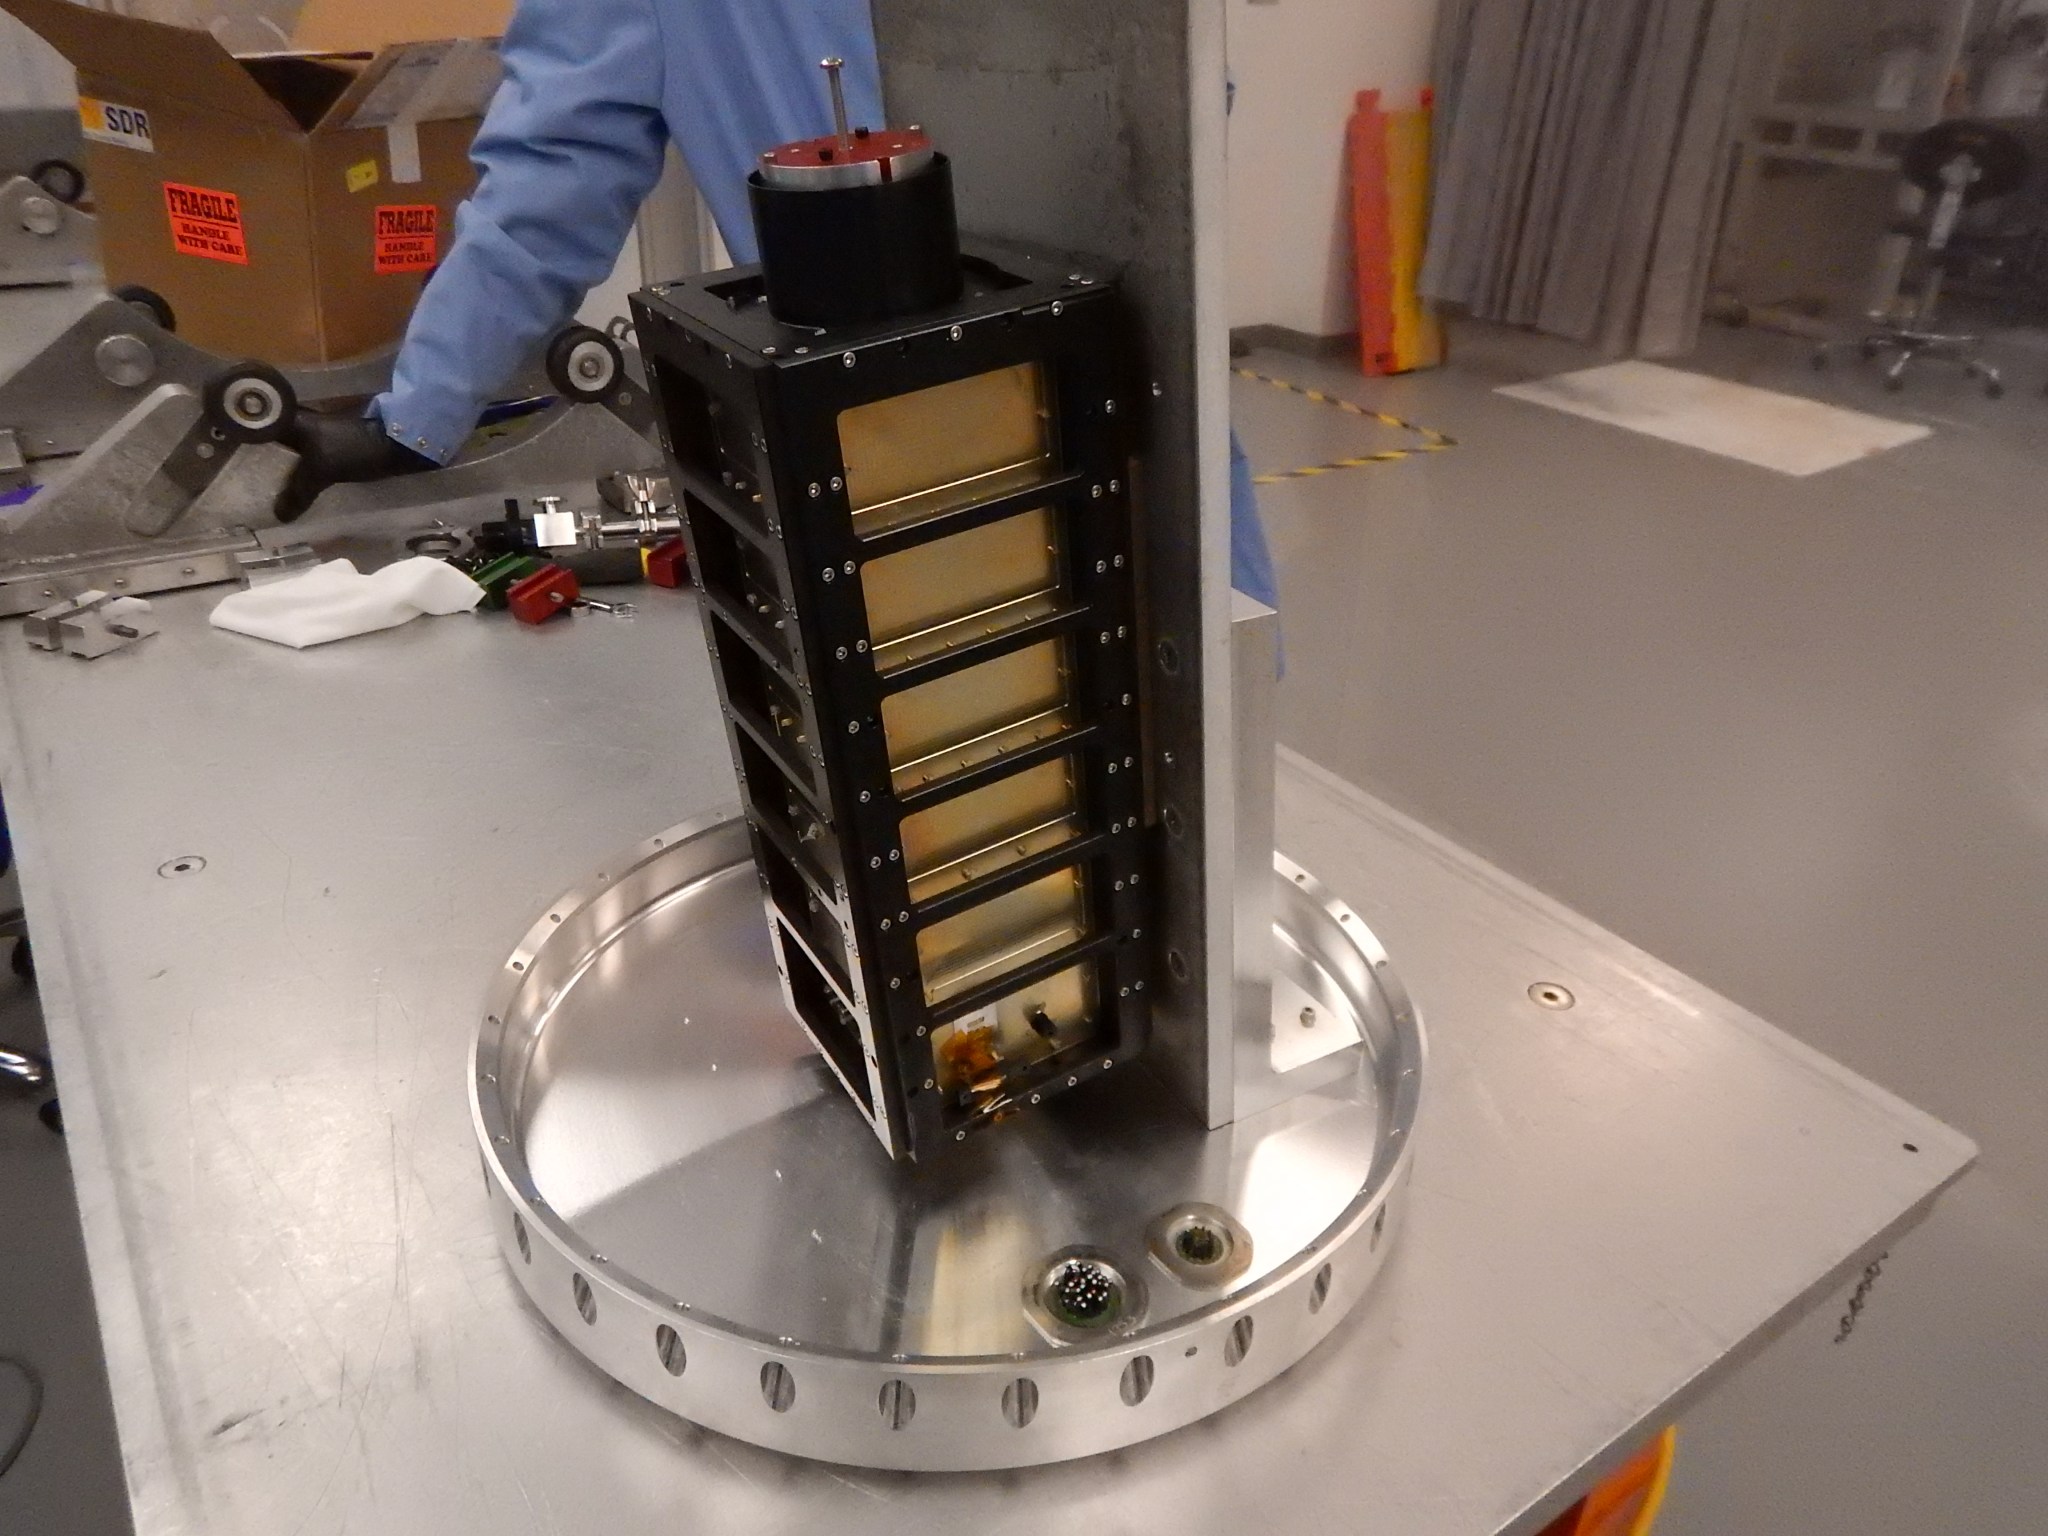 The miniaturized CubeSat payload called both CuPID and WASP returned data about a physical phenomenon called charge exchange. 